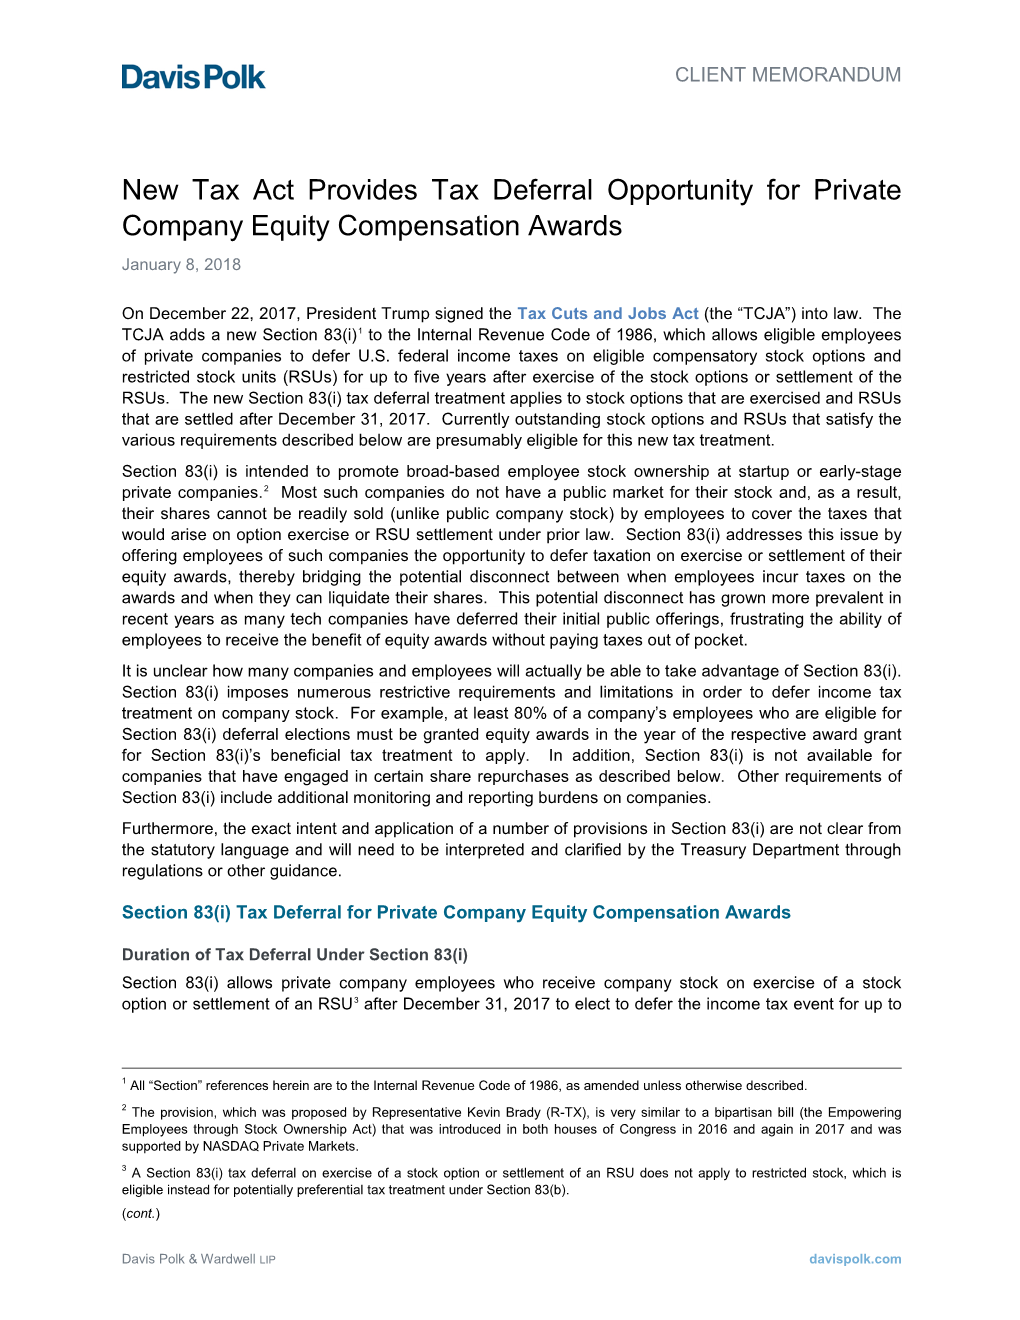 New Tax Act Provides Tax Deferral Opportunity for Private Company Equity Compensation Awards January 8, 2018